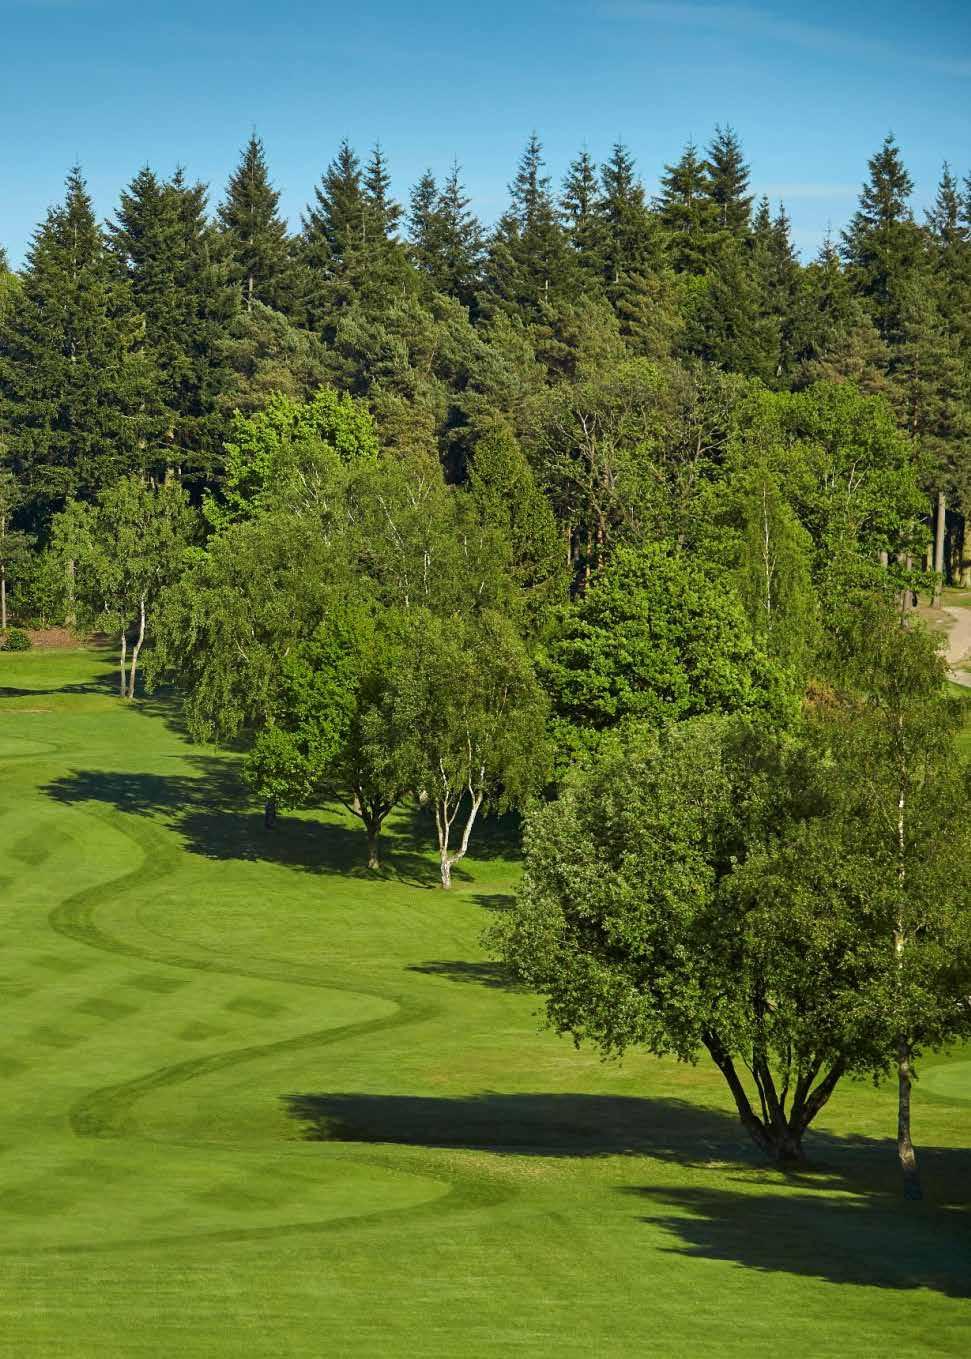 FOXHILLS, SURREY WEDNESDAY 27 TH SEPTEMBER Surrounded by Scots pine, beech and silver birch trees, the Longcross is one